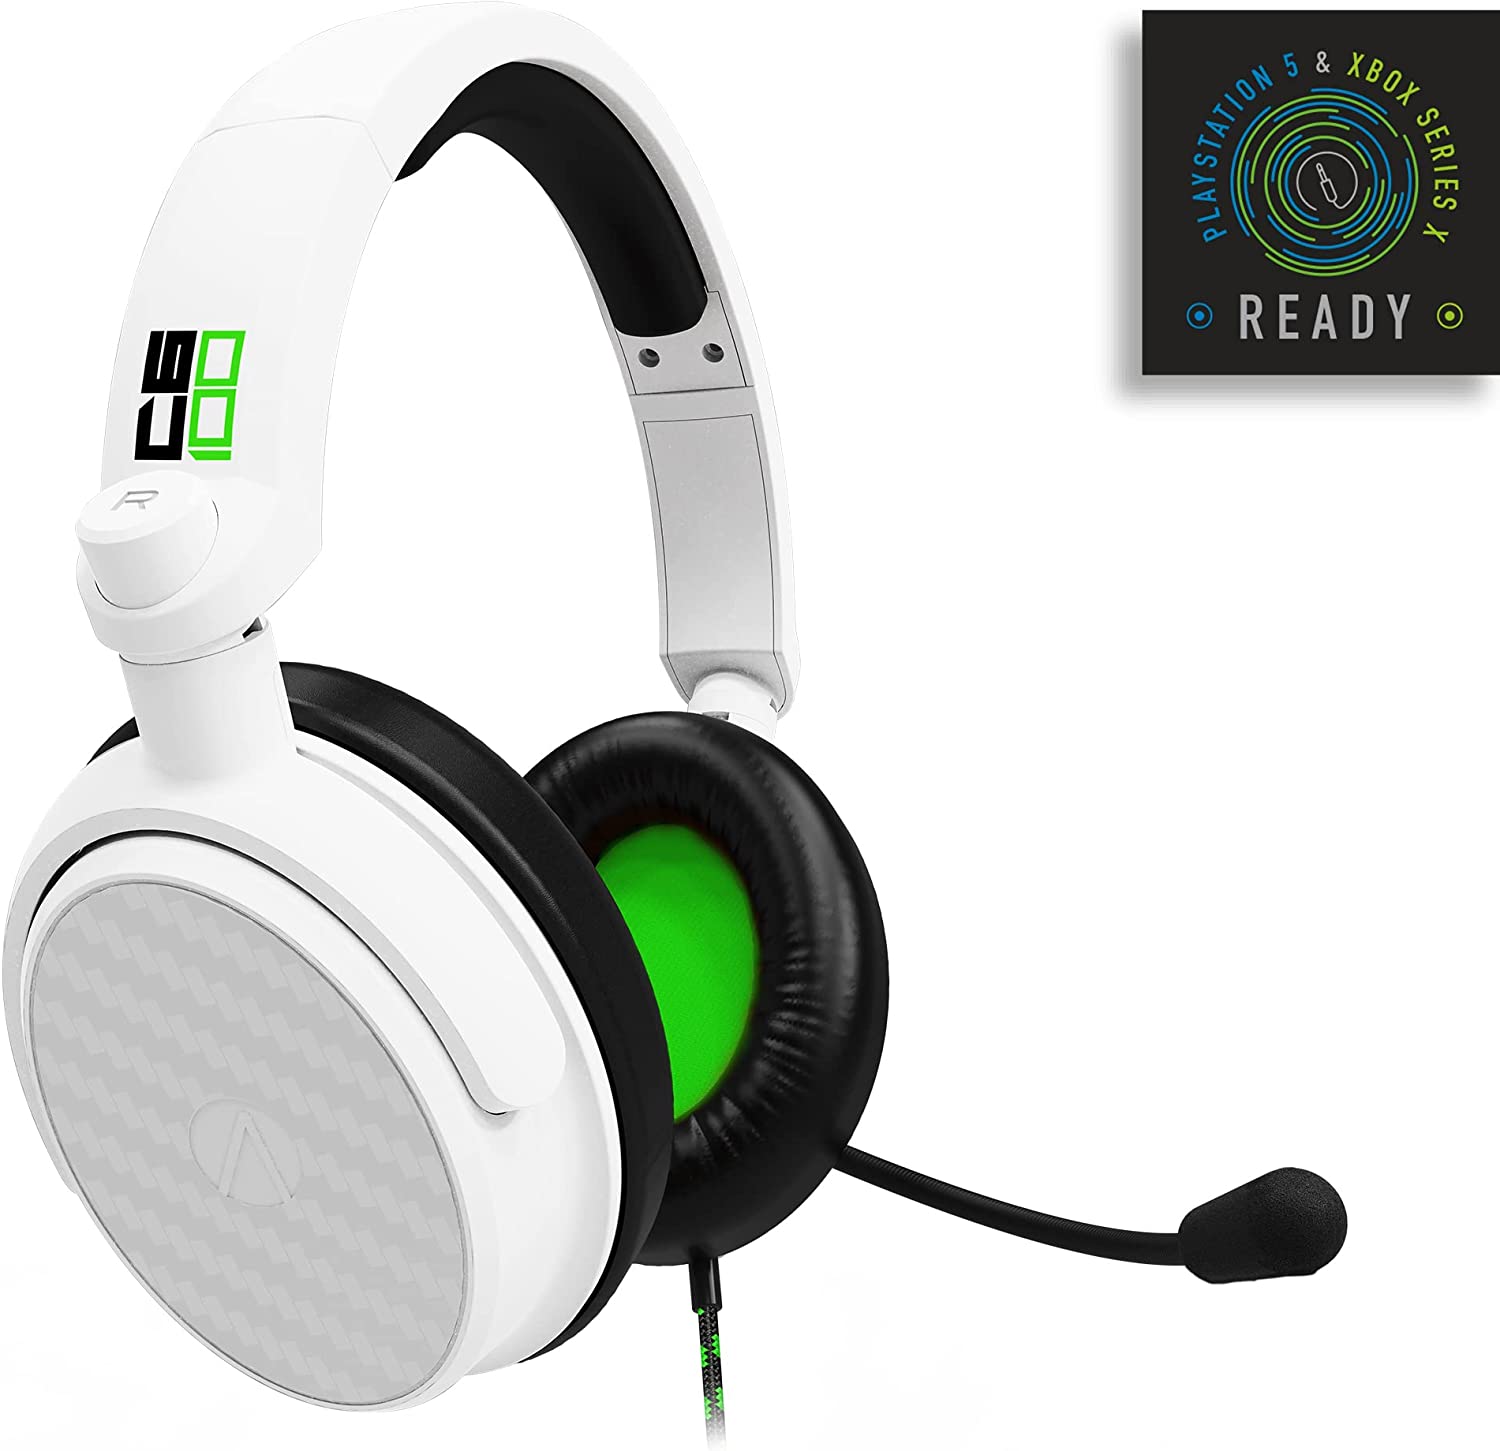 Stealth C6-100 Gaming Headset (White/Green)